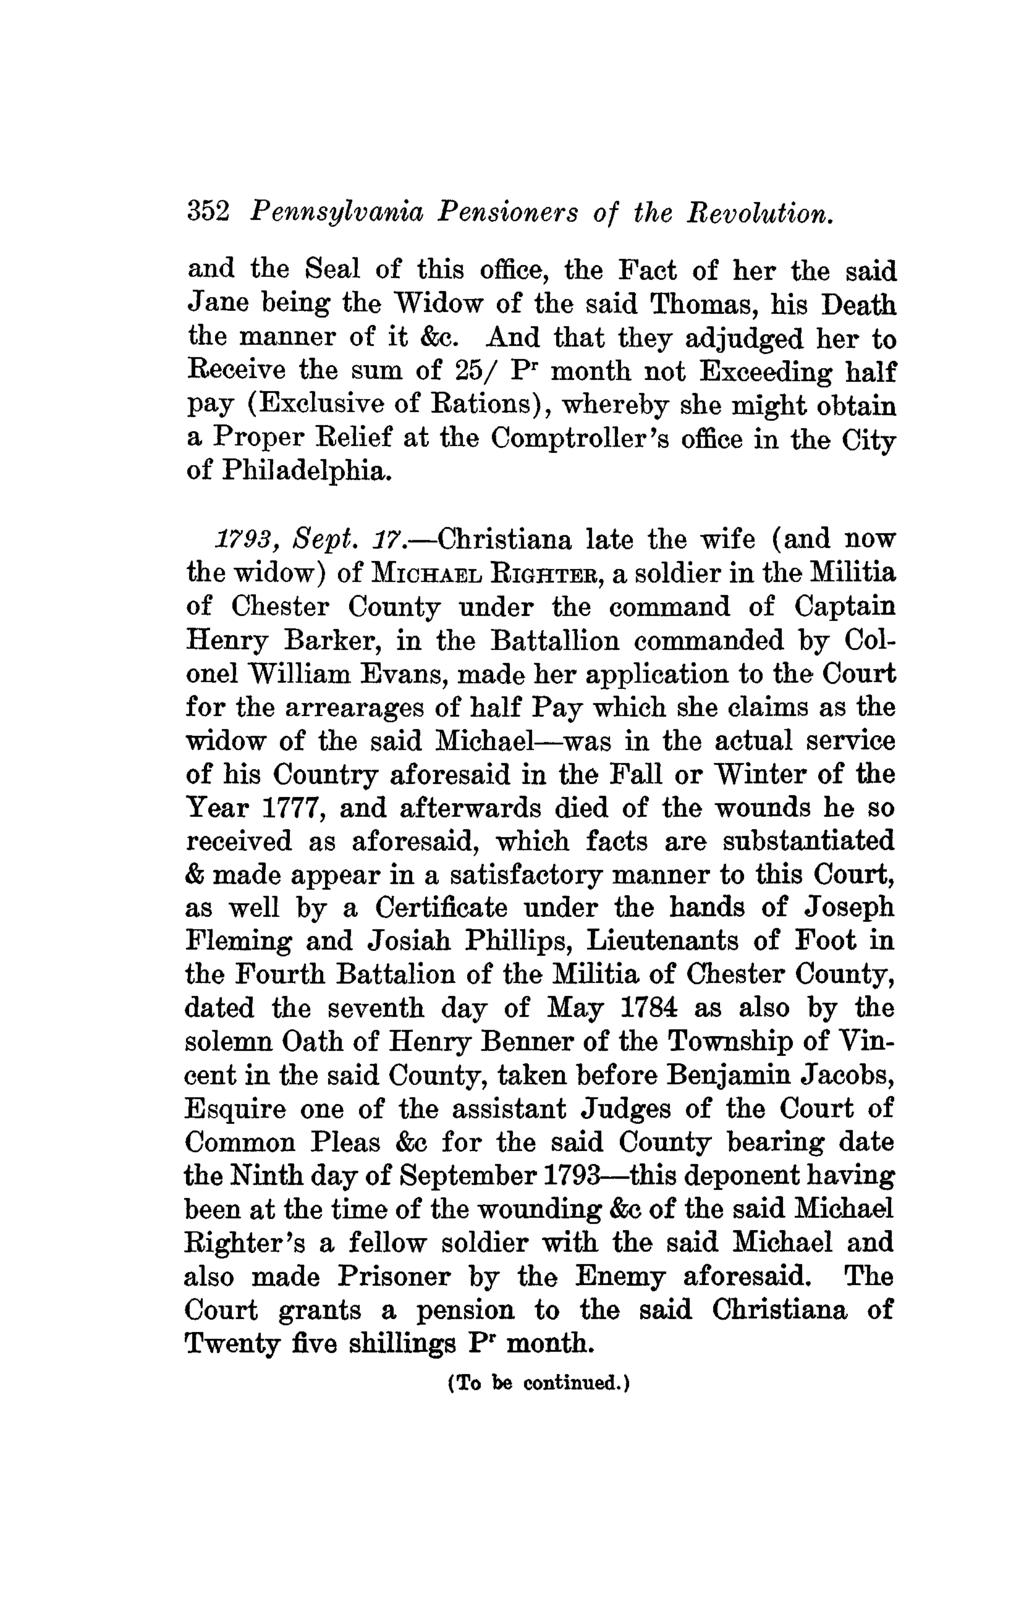 352 Pennsylvania Pensioners of the Revolution. and the Seal of this office, the Fact of her the said Jane being the Widow of the said Thomas, his Death the manner of it &c.